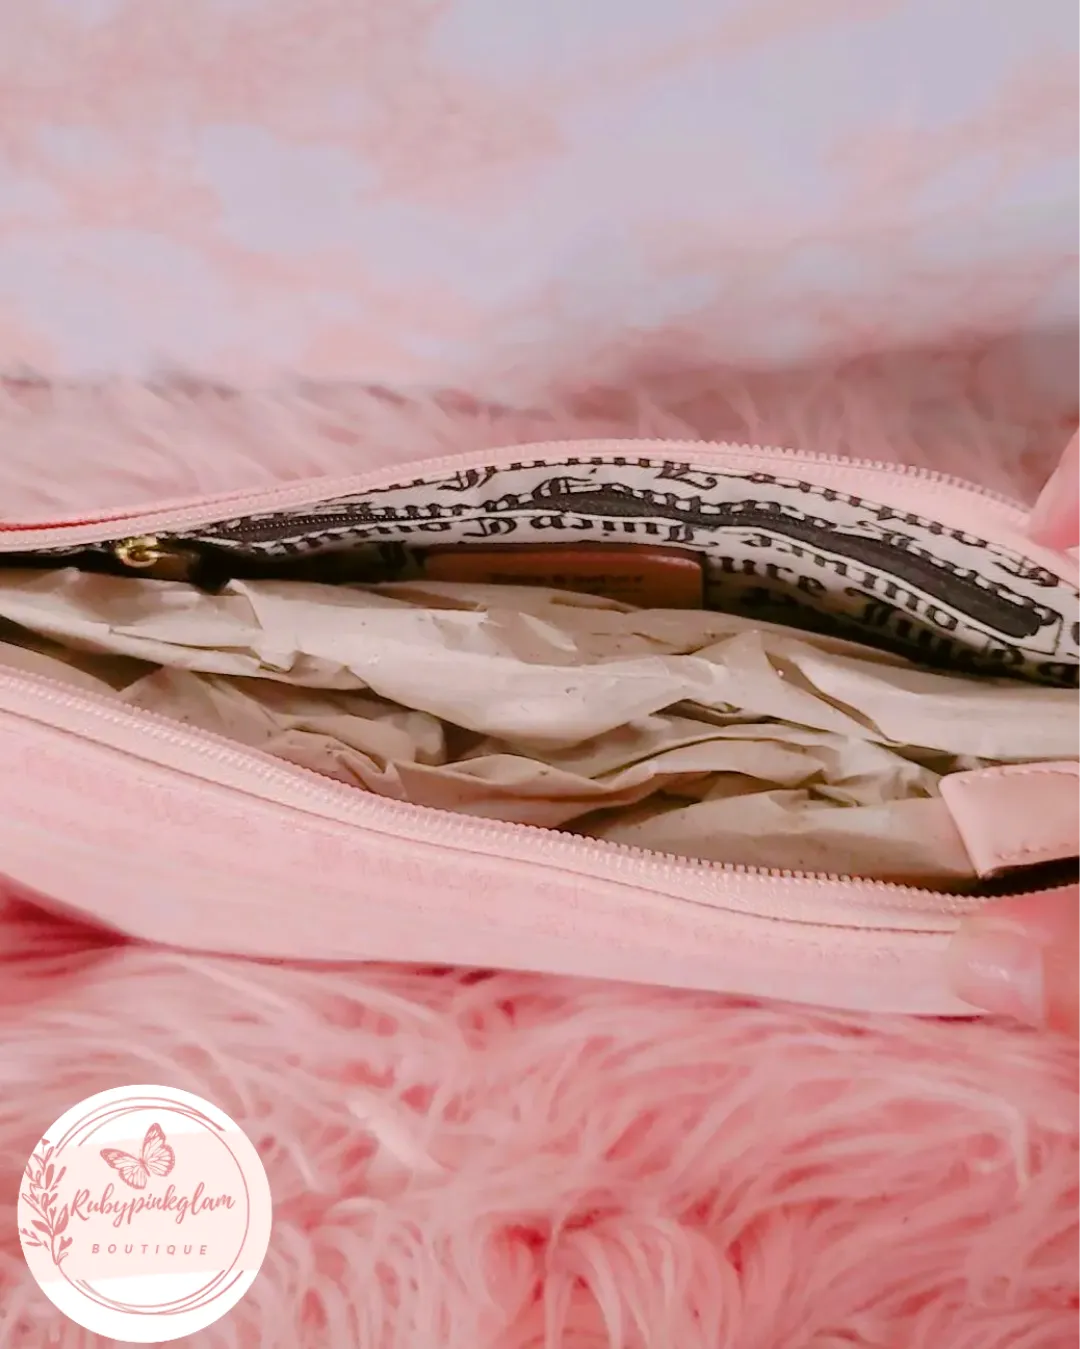 Small Cosmetic Bag Cute Makeup Bag Y2k Accessories Aesthetic Make Up Bag  Y2k Purse Cosmetic Bag for Purse (pink)